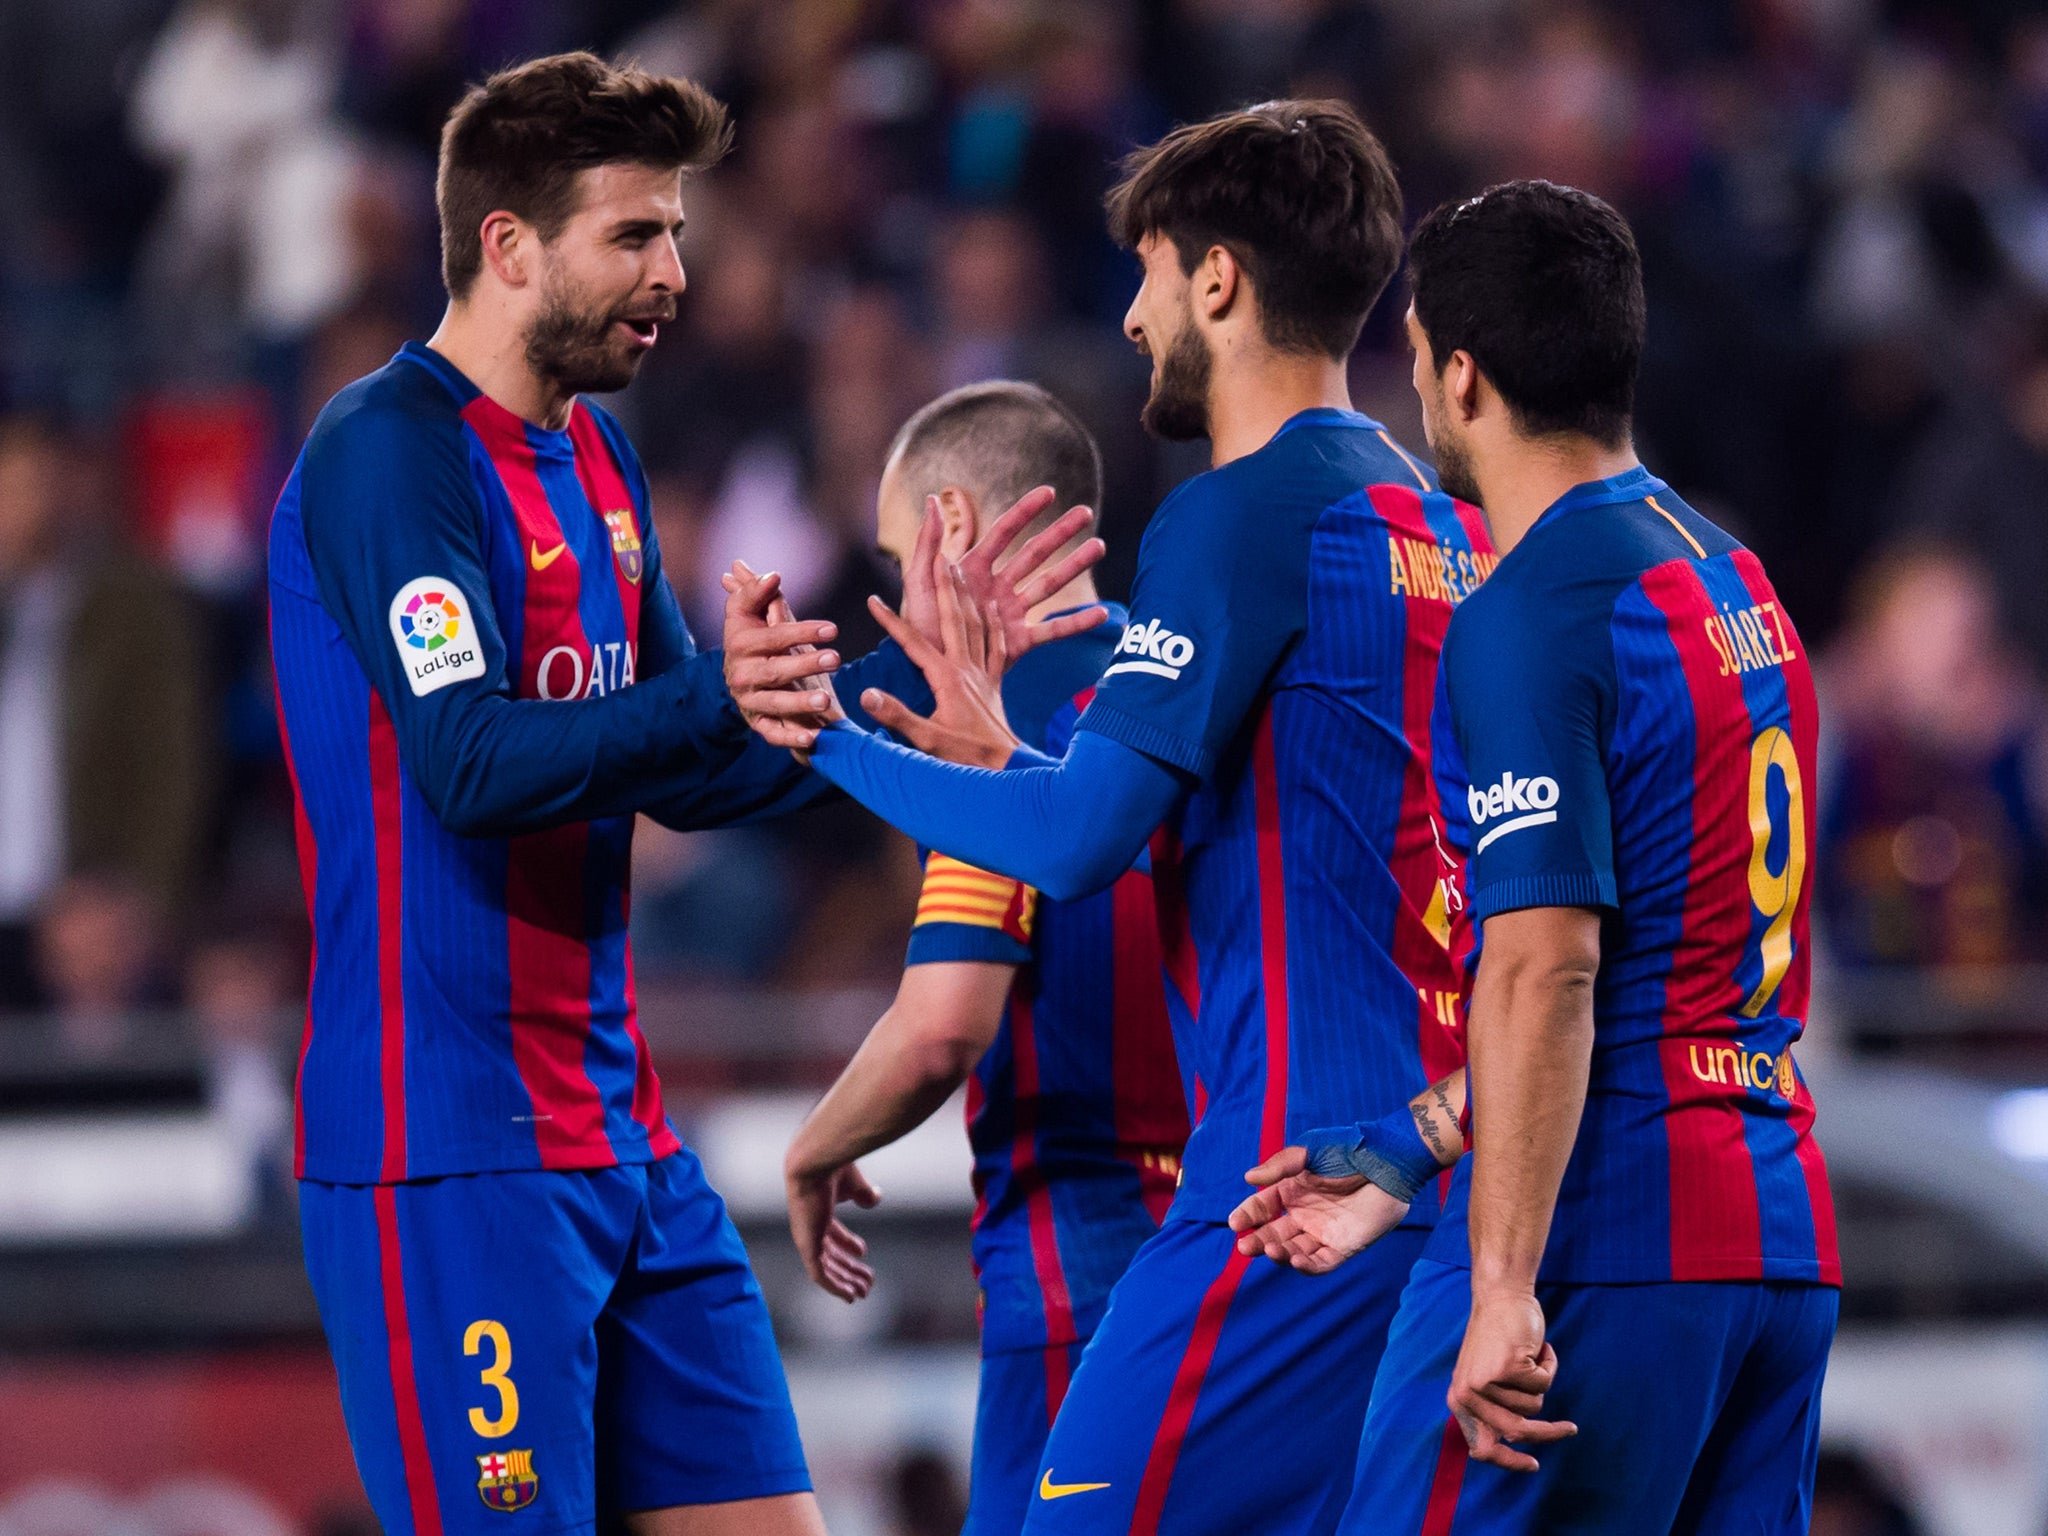 Barcelona are yet to concede a penalty or have a player sent off in La Liga this season